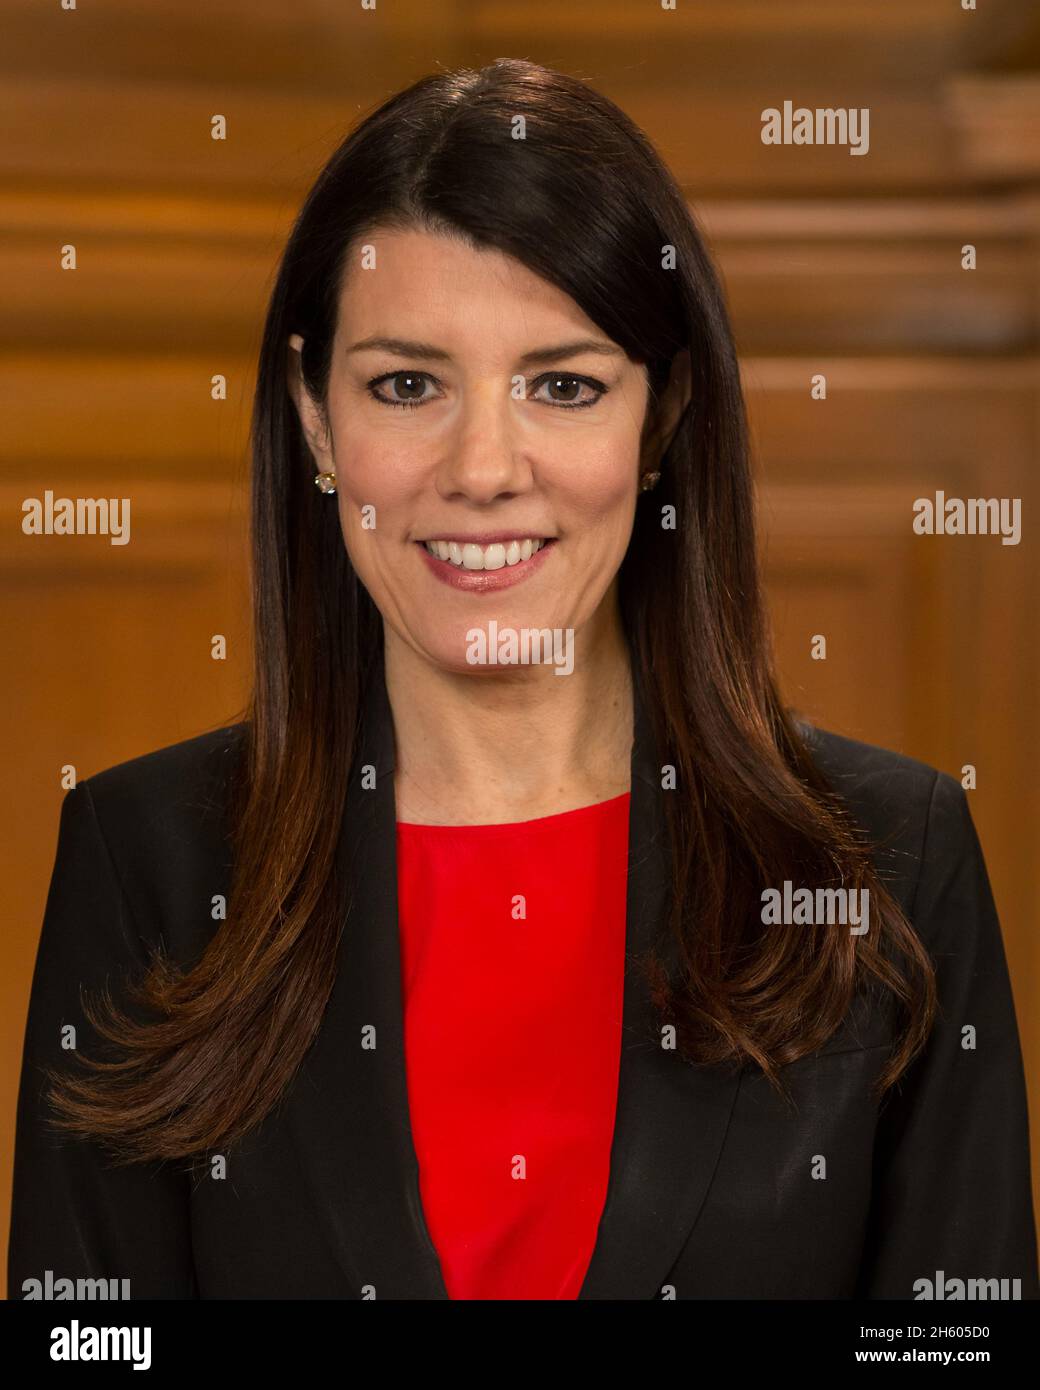 Official portrait of Catherine Stefani, Board of Supervisors Member District 2 ca. 19 March 2018 Stock Photo